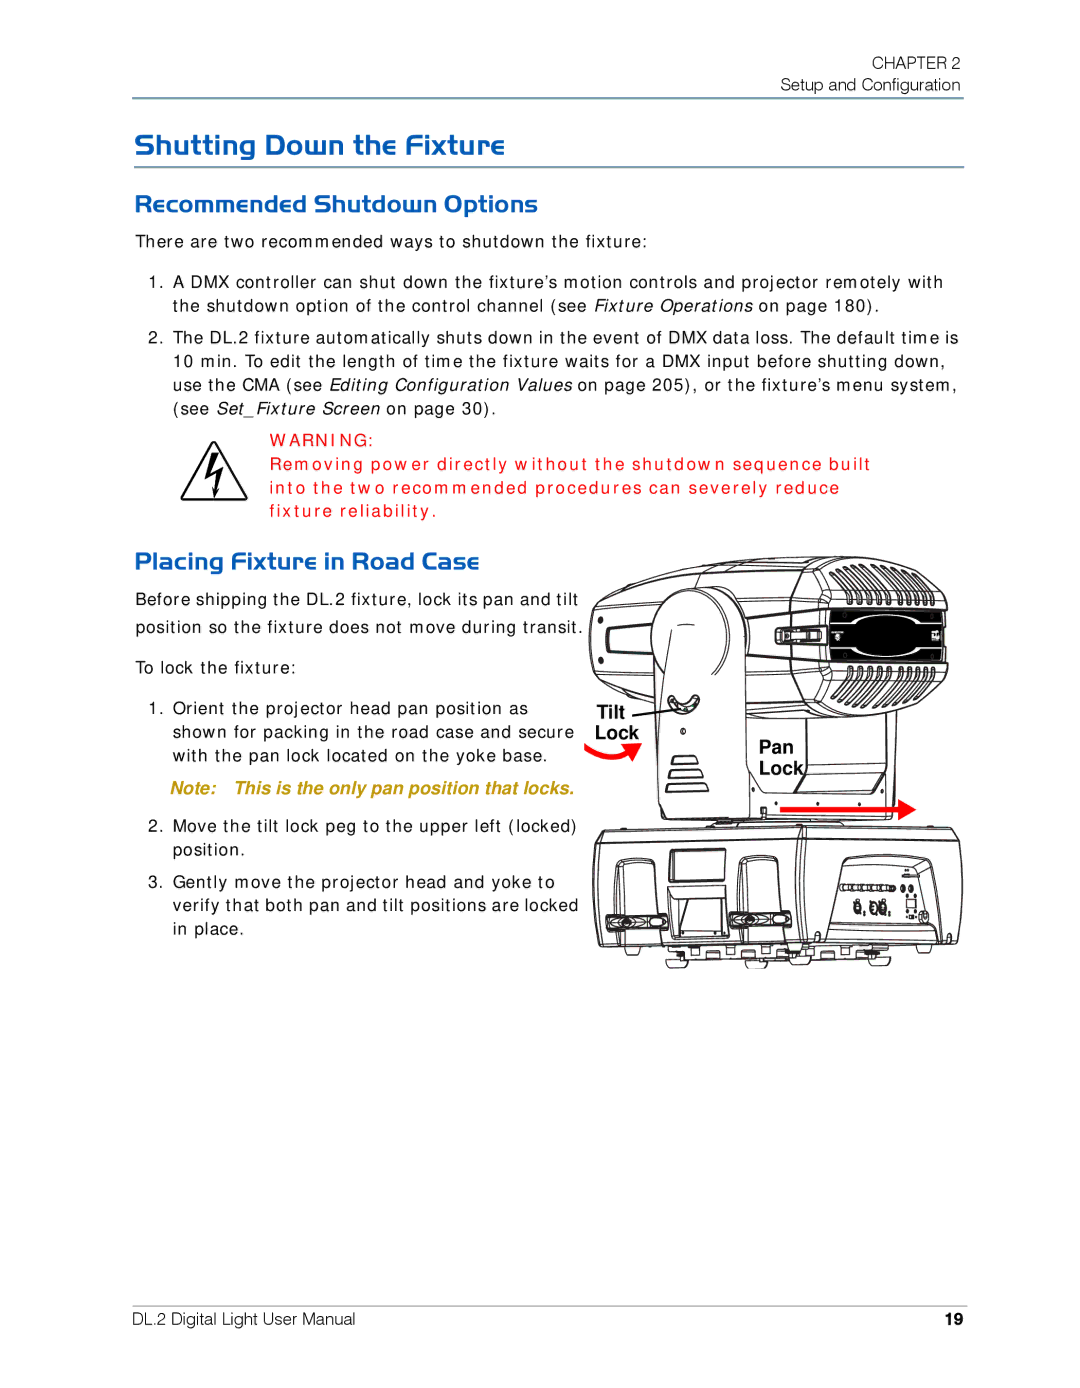 High End Systems DL.2 user manual Shutting Down the Fixture, Recommended Shutdown Options, Placing Fixture in Road Case 